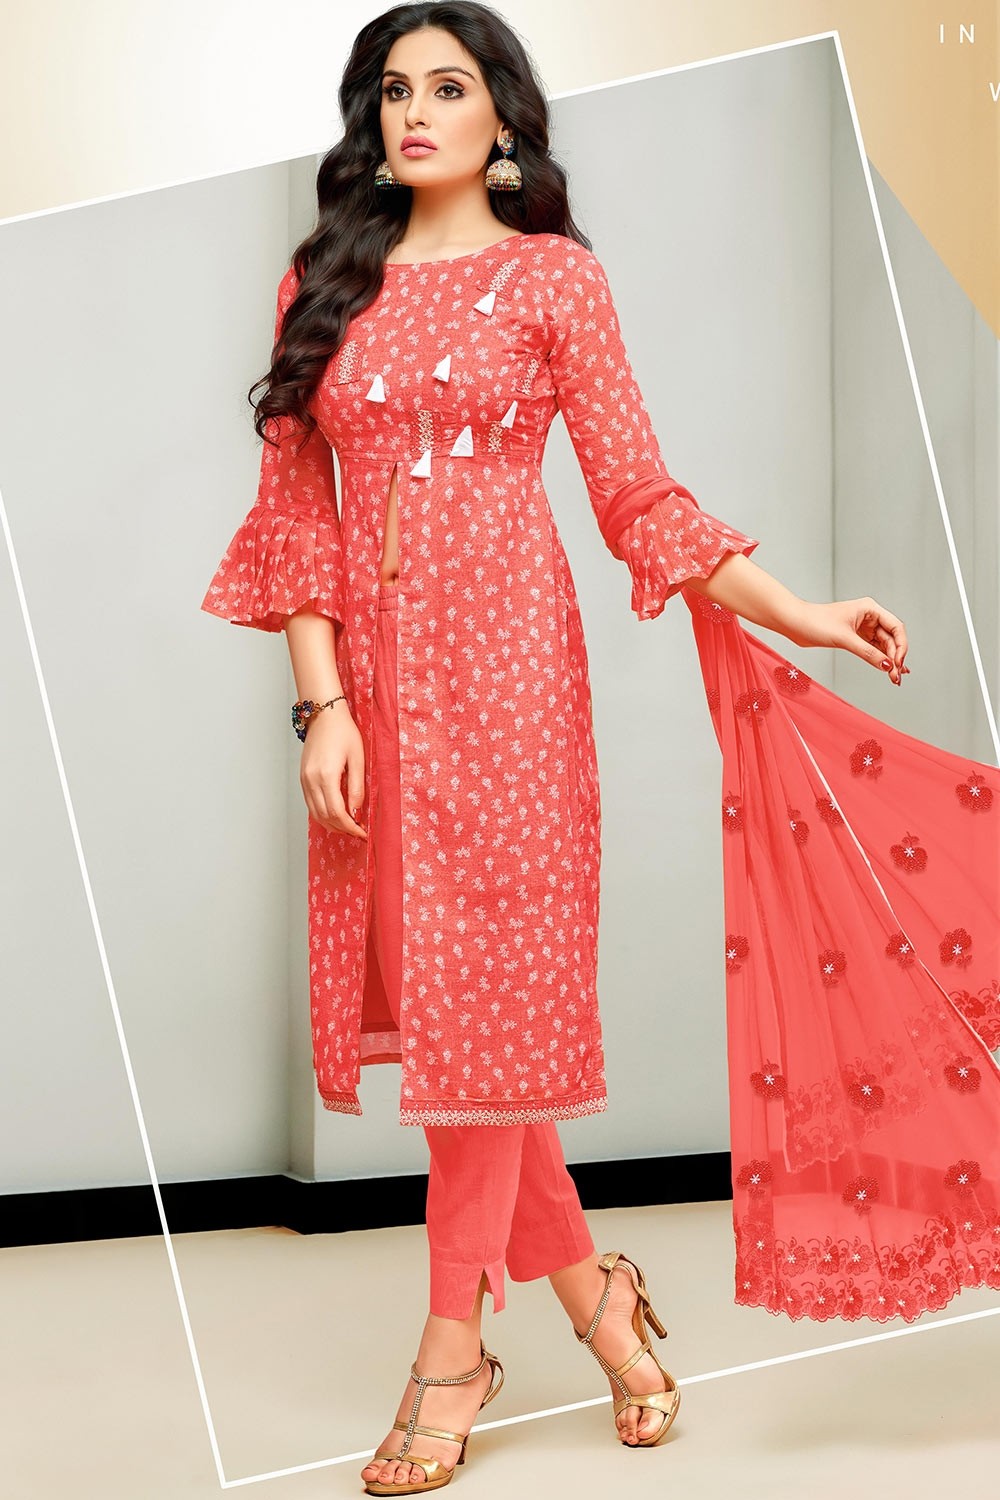 https://media.shopkund.com/media/catalog/product/cache/3/image/9df78eab33525d08d6e5fb8d27136e95/7/8/78952-red-cotton-and-satin-straight-pant-suit-sk12539.jpg